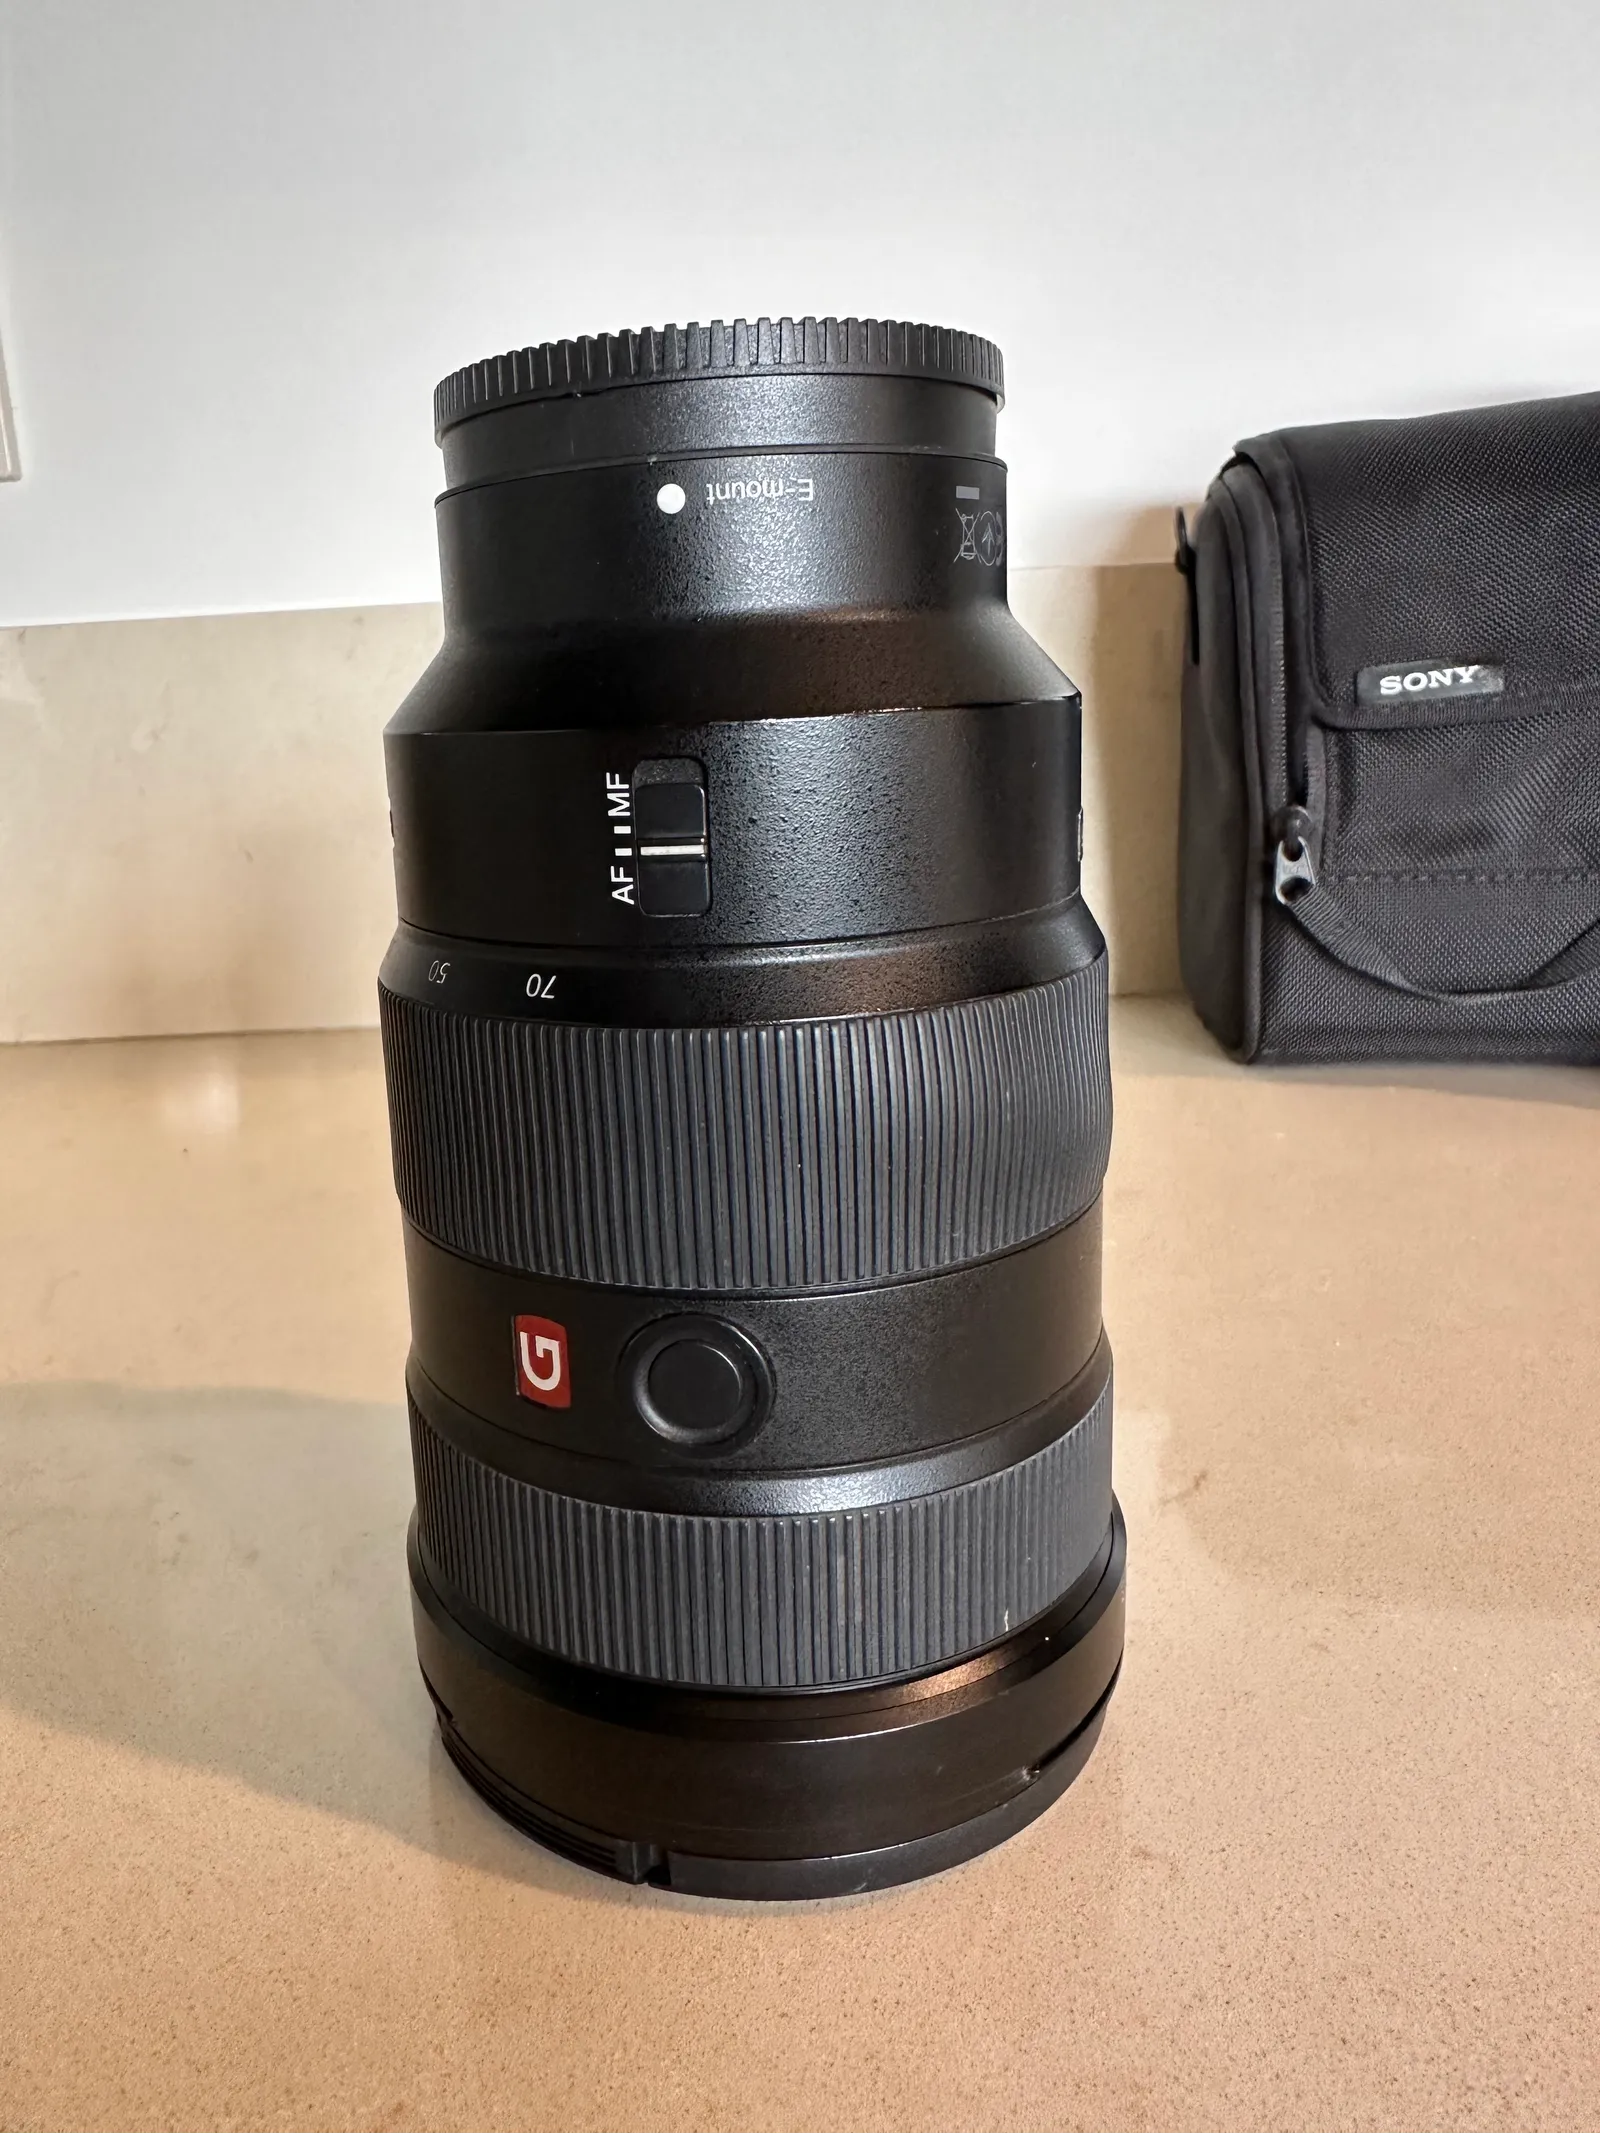 MINT: Sony 24-70mm 2.8 Gmaster lens -UV filter included Excellent condition